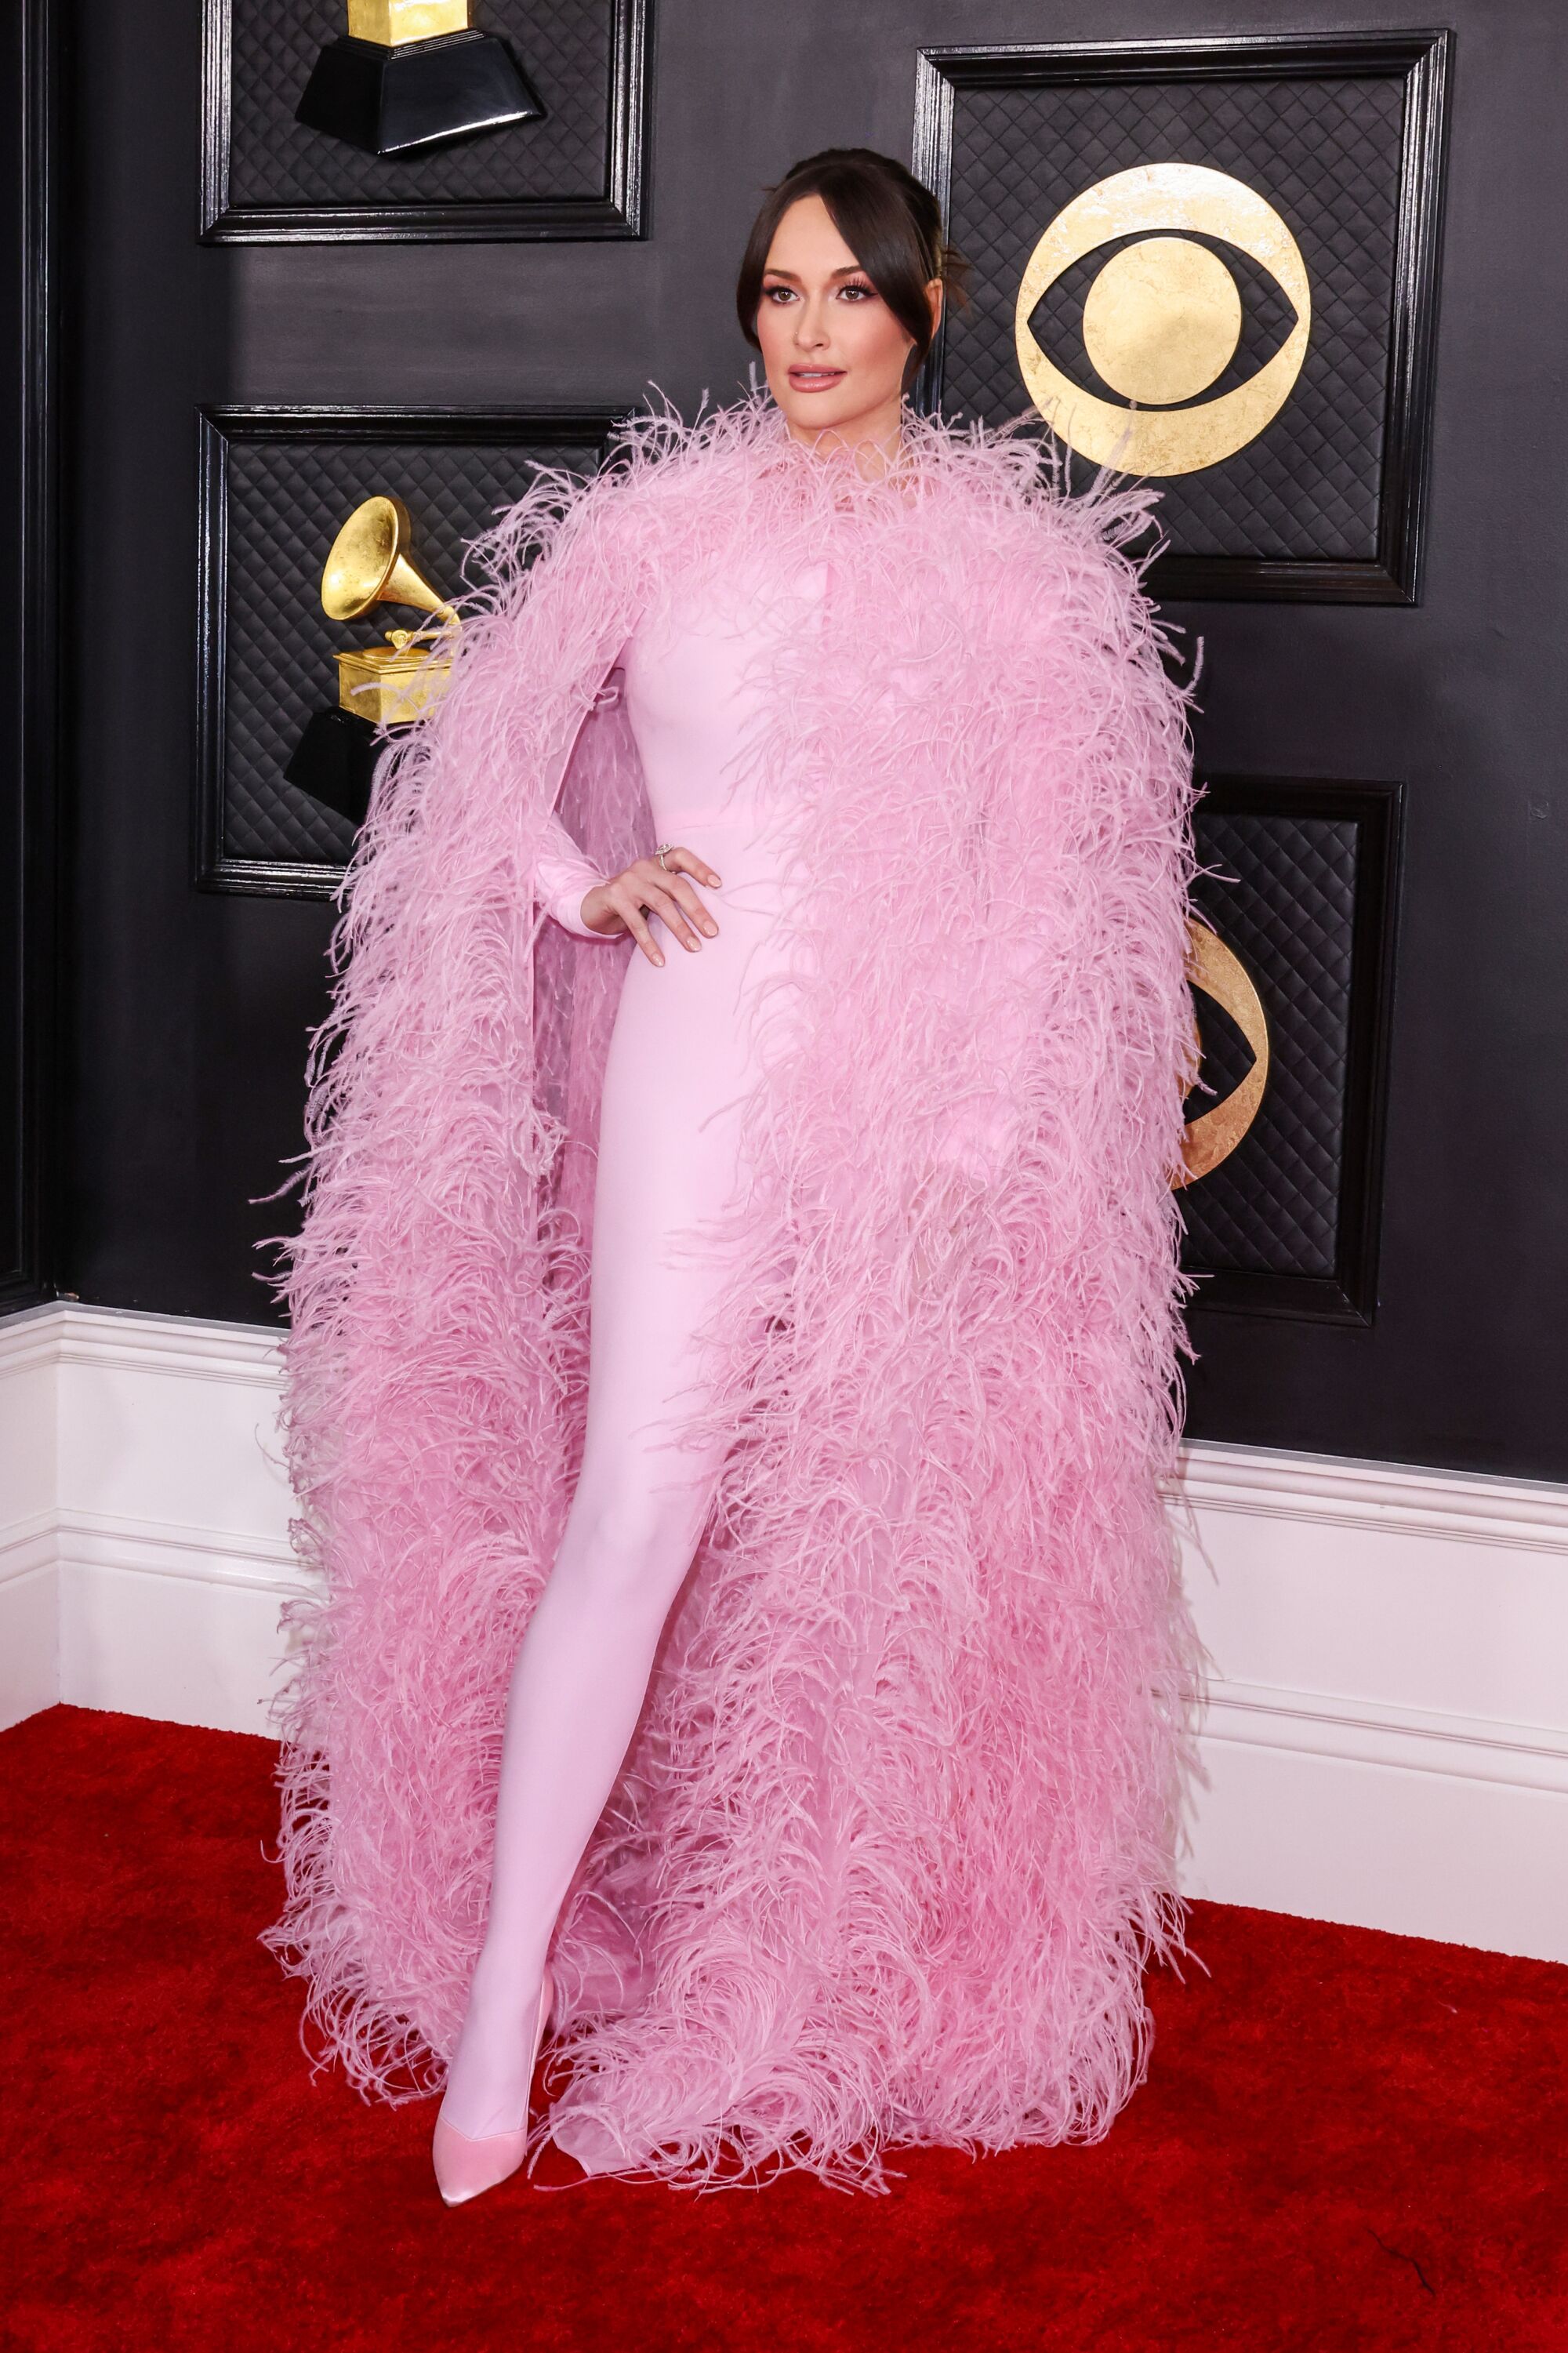 Kacey Musgraves on the 2023 Grammy Awards red carpet.